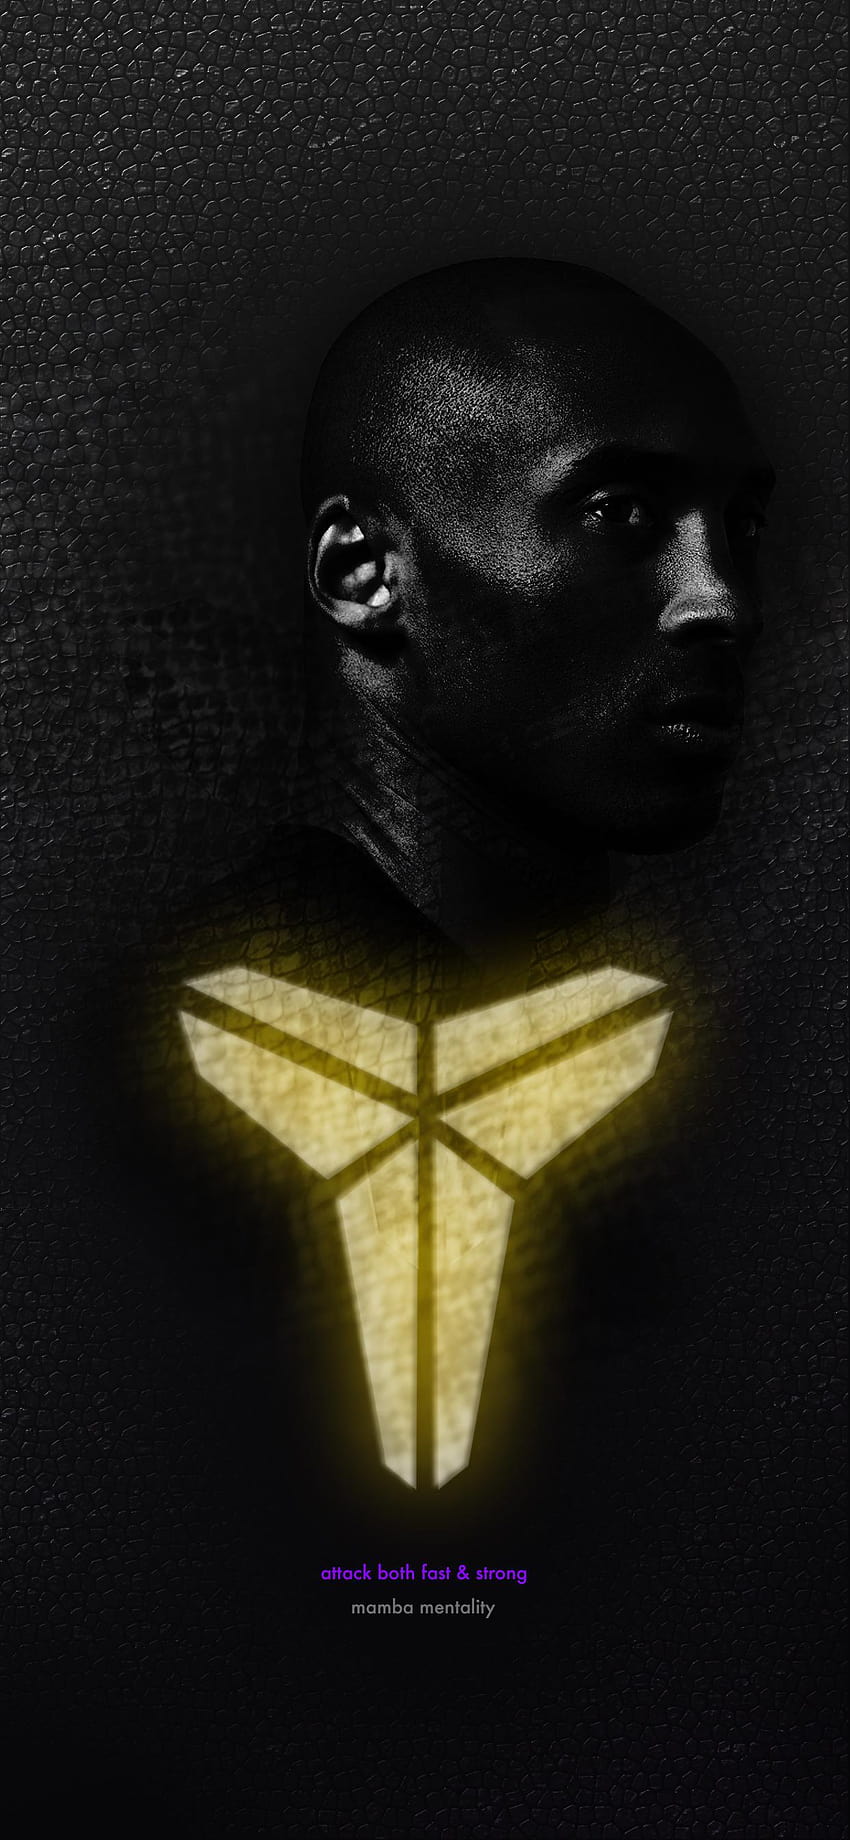 Wanted to make a as I could find one that really spoke, mamba mentality HD phone wallpaper